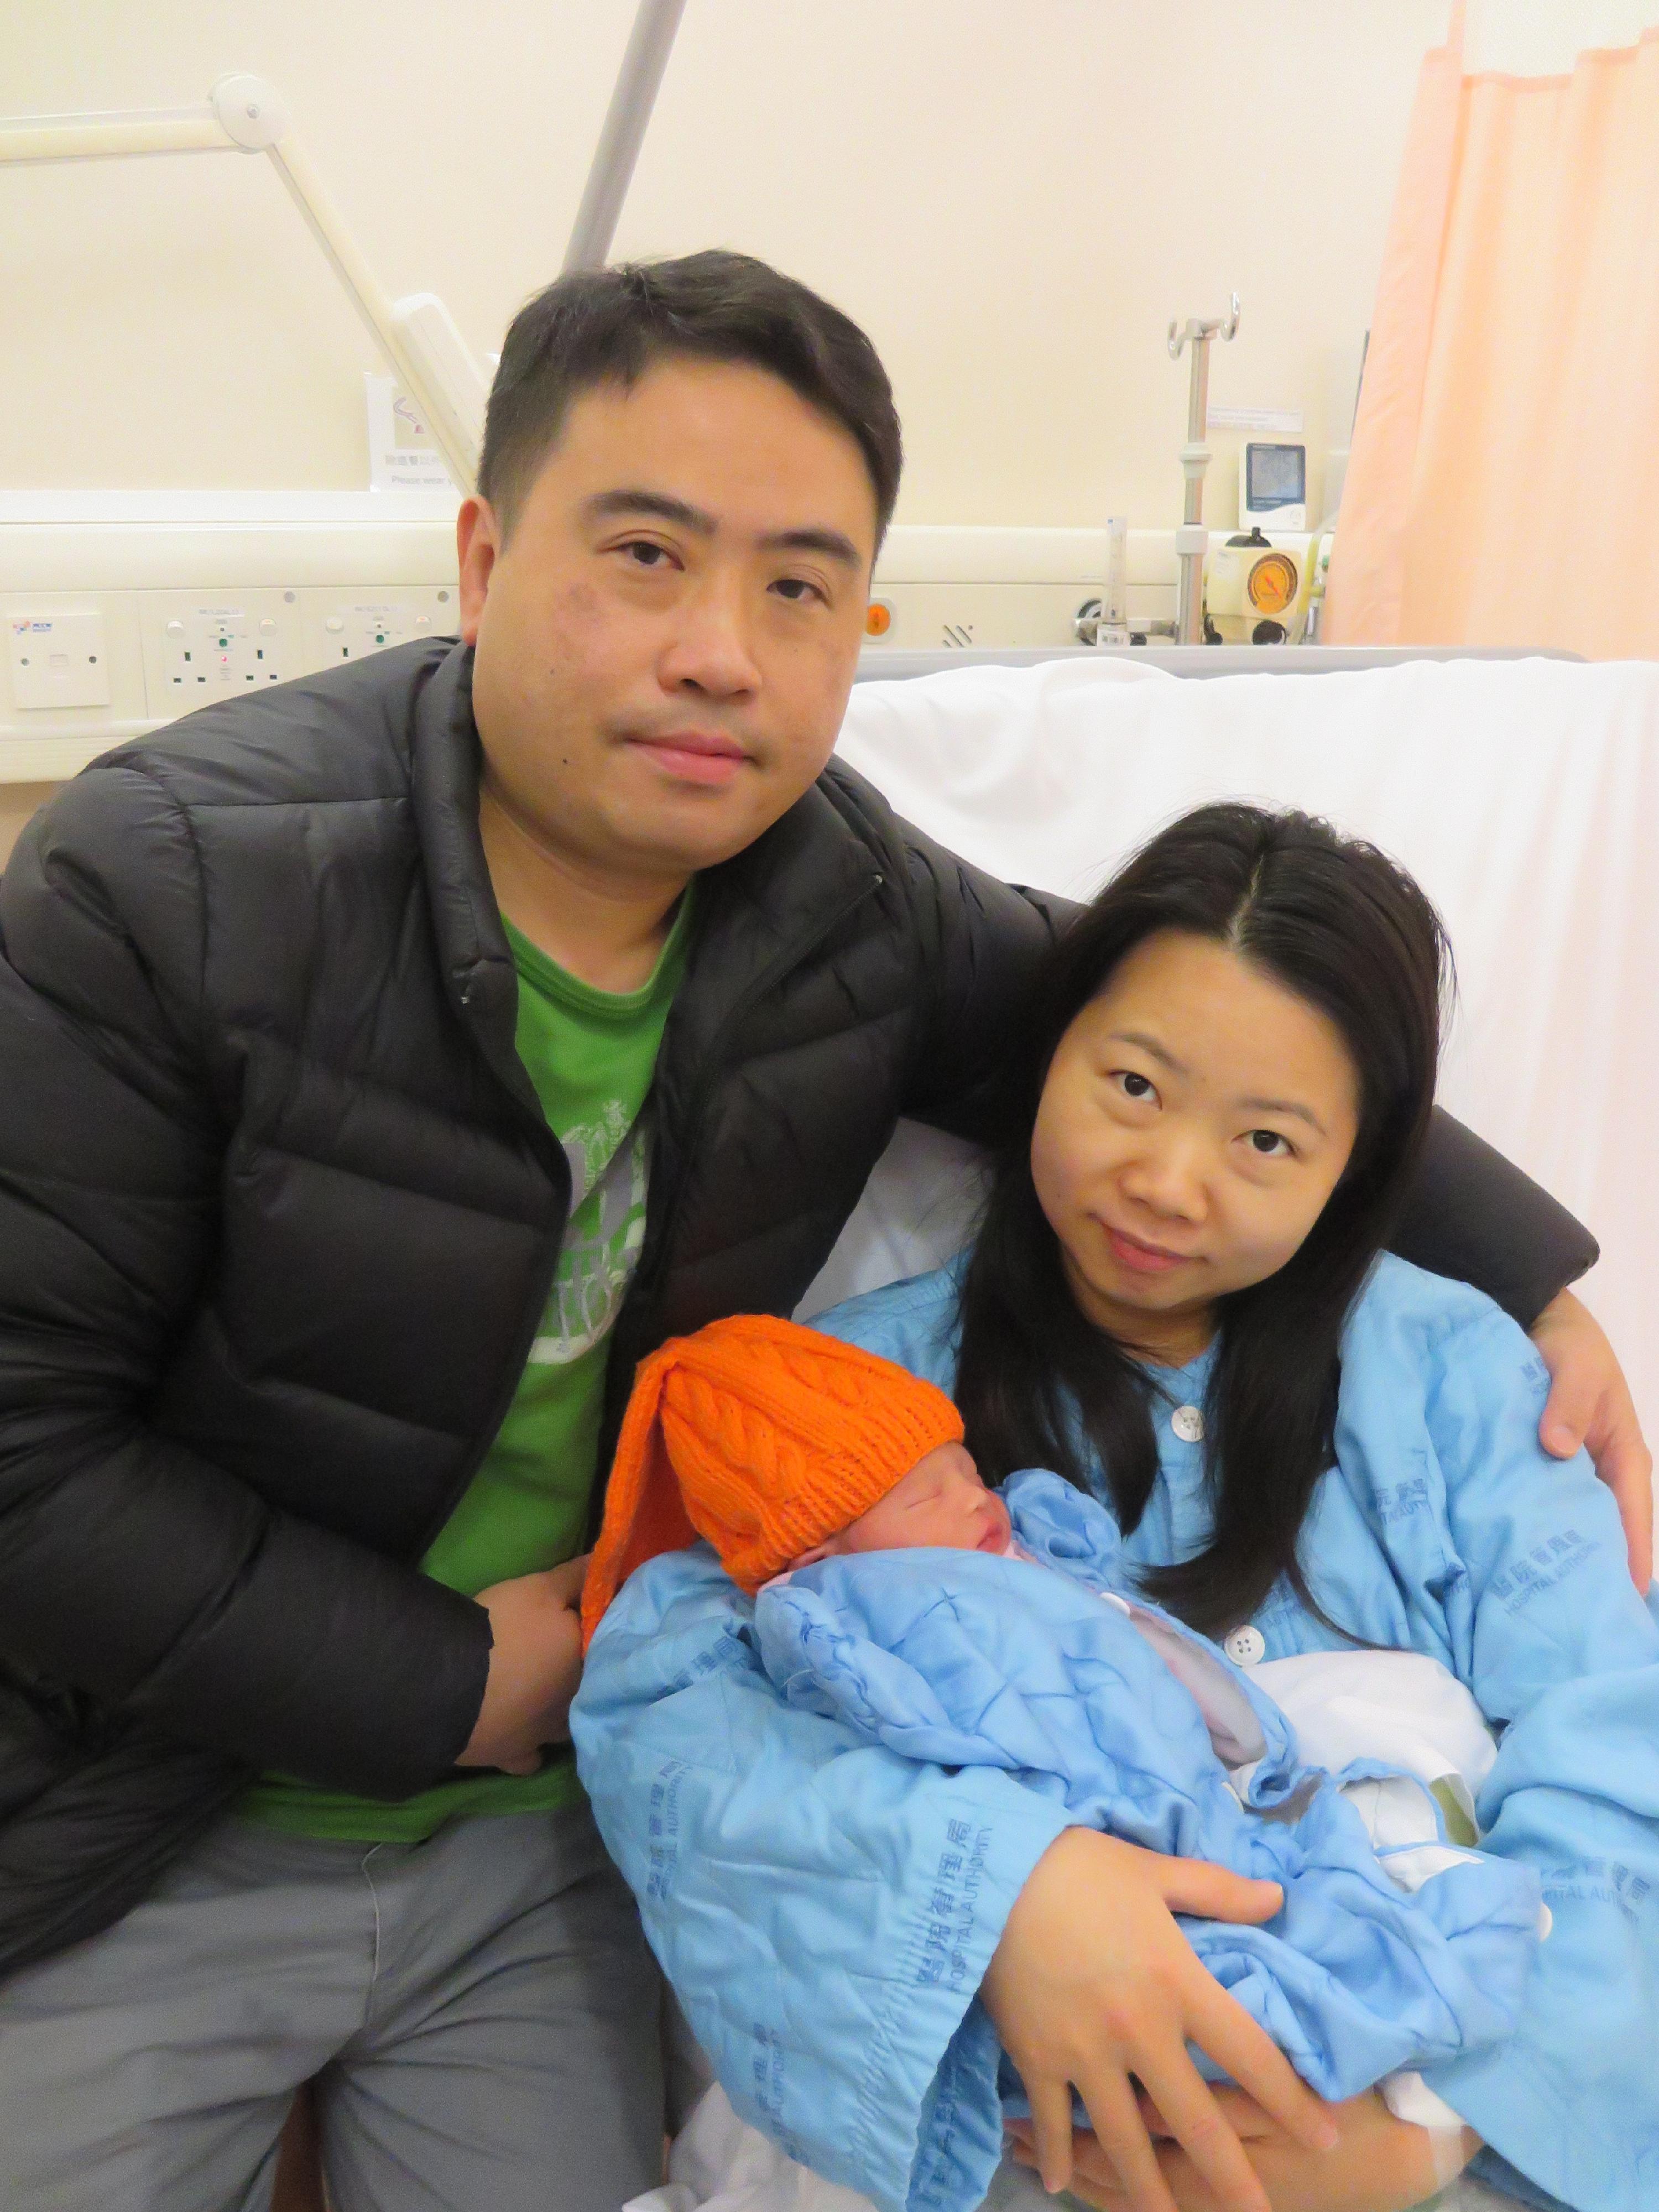 The Yung's baby boy, weighed 2.9kg, was born in Queen Mary Hospital at 0.25am today (January 22).